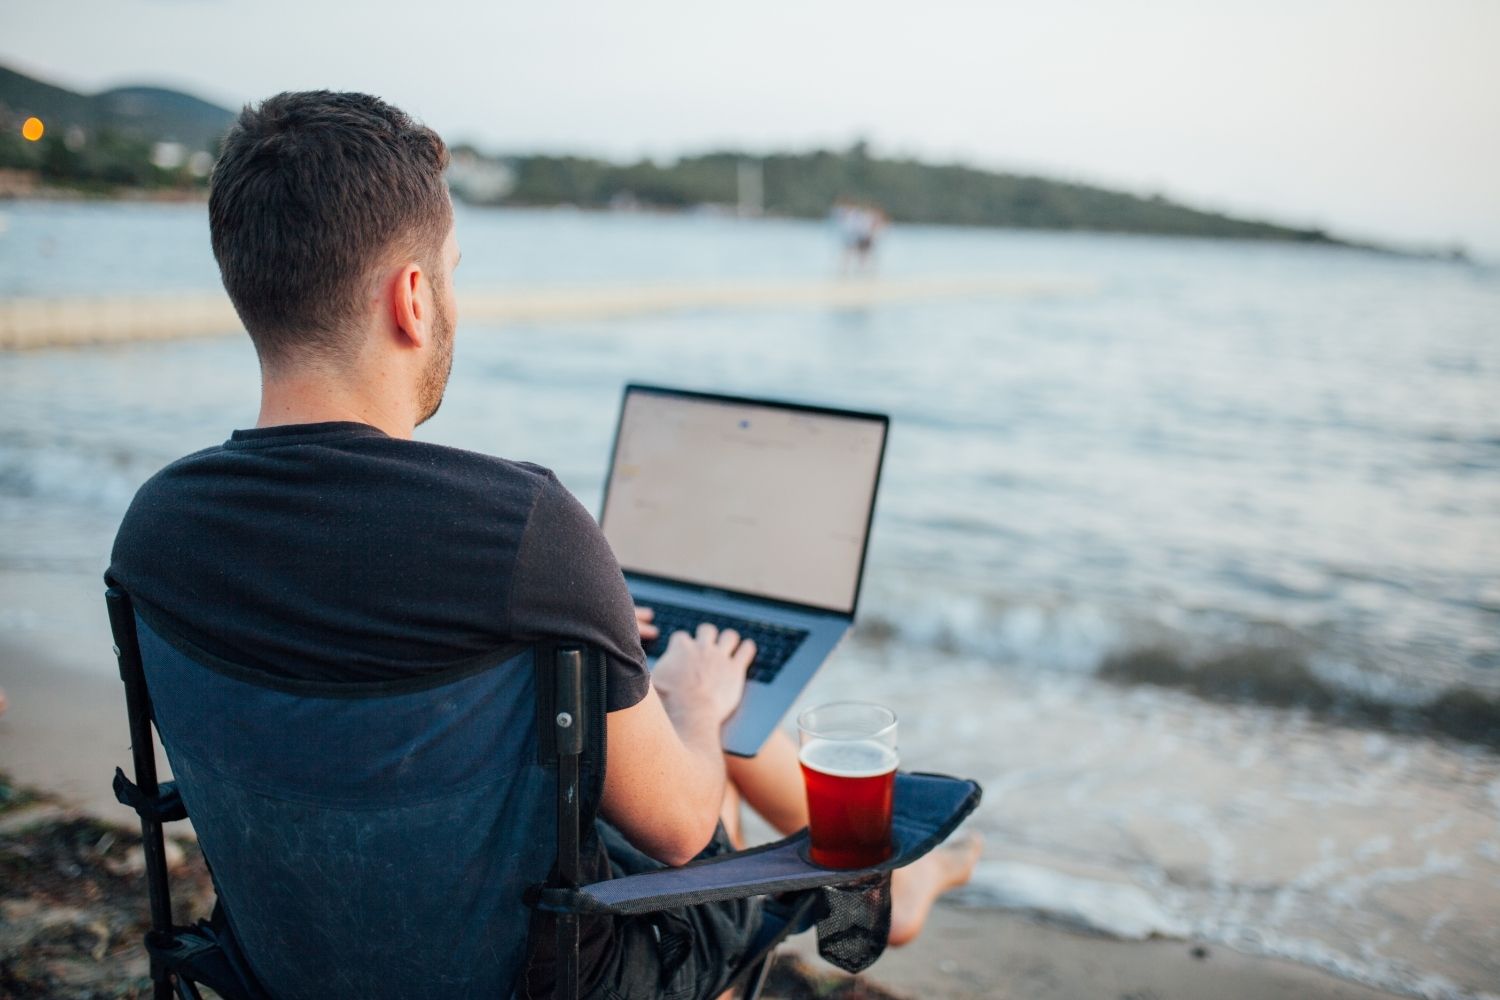 How To Start Working Remotely Even If You Don't Have Any Experience 6